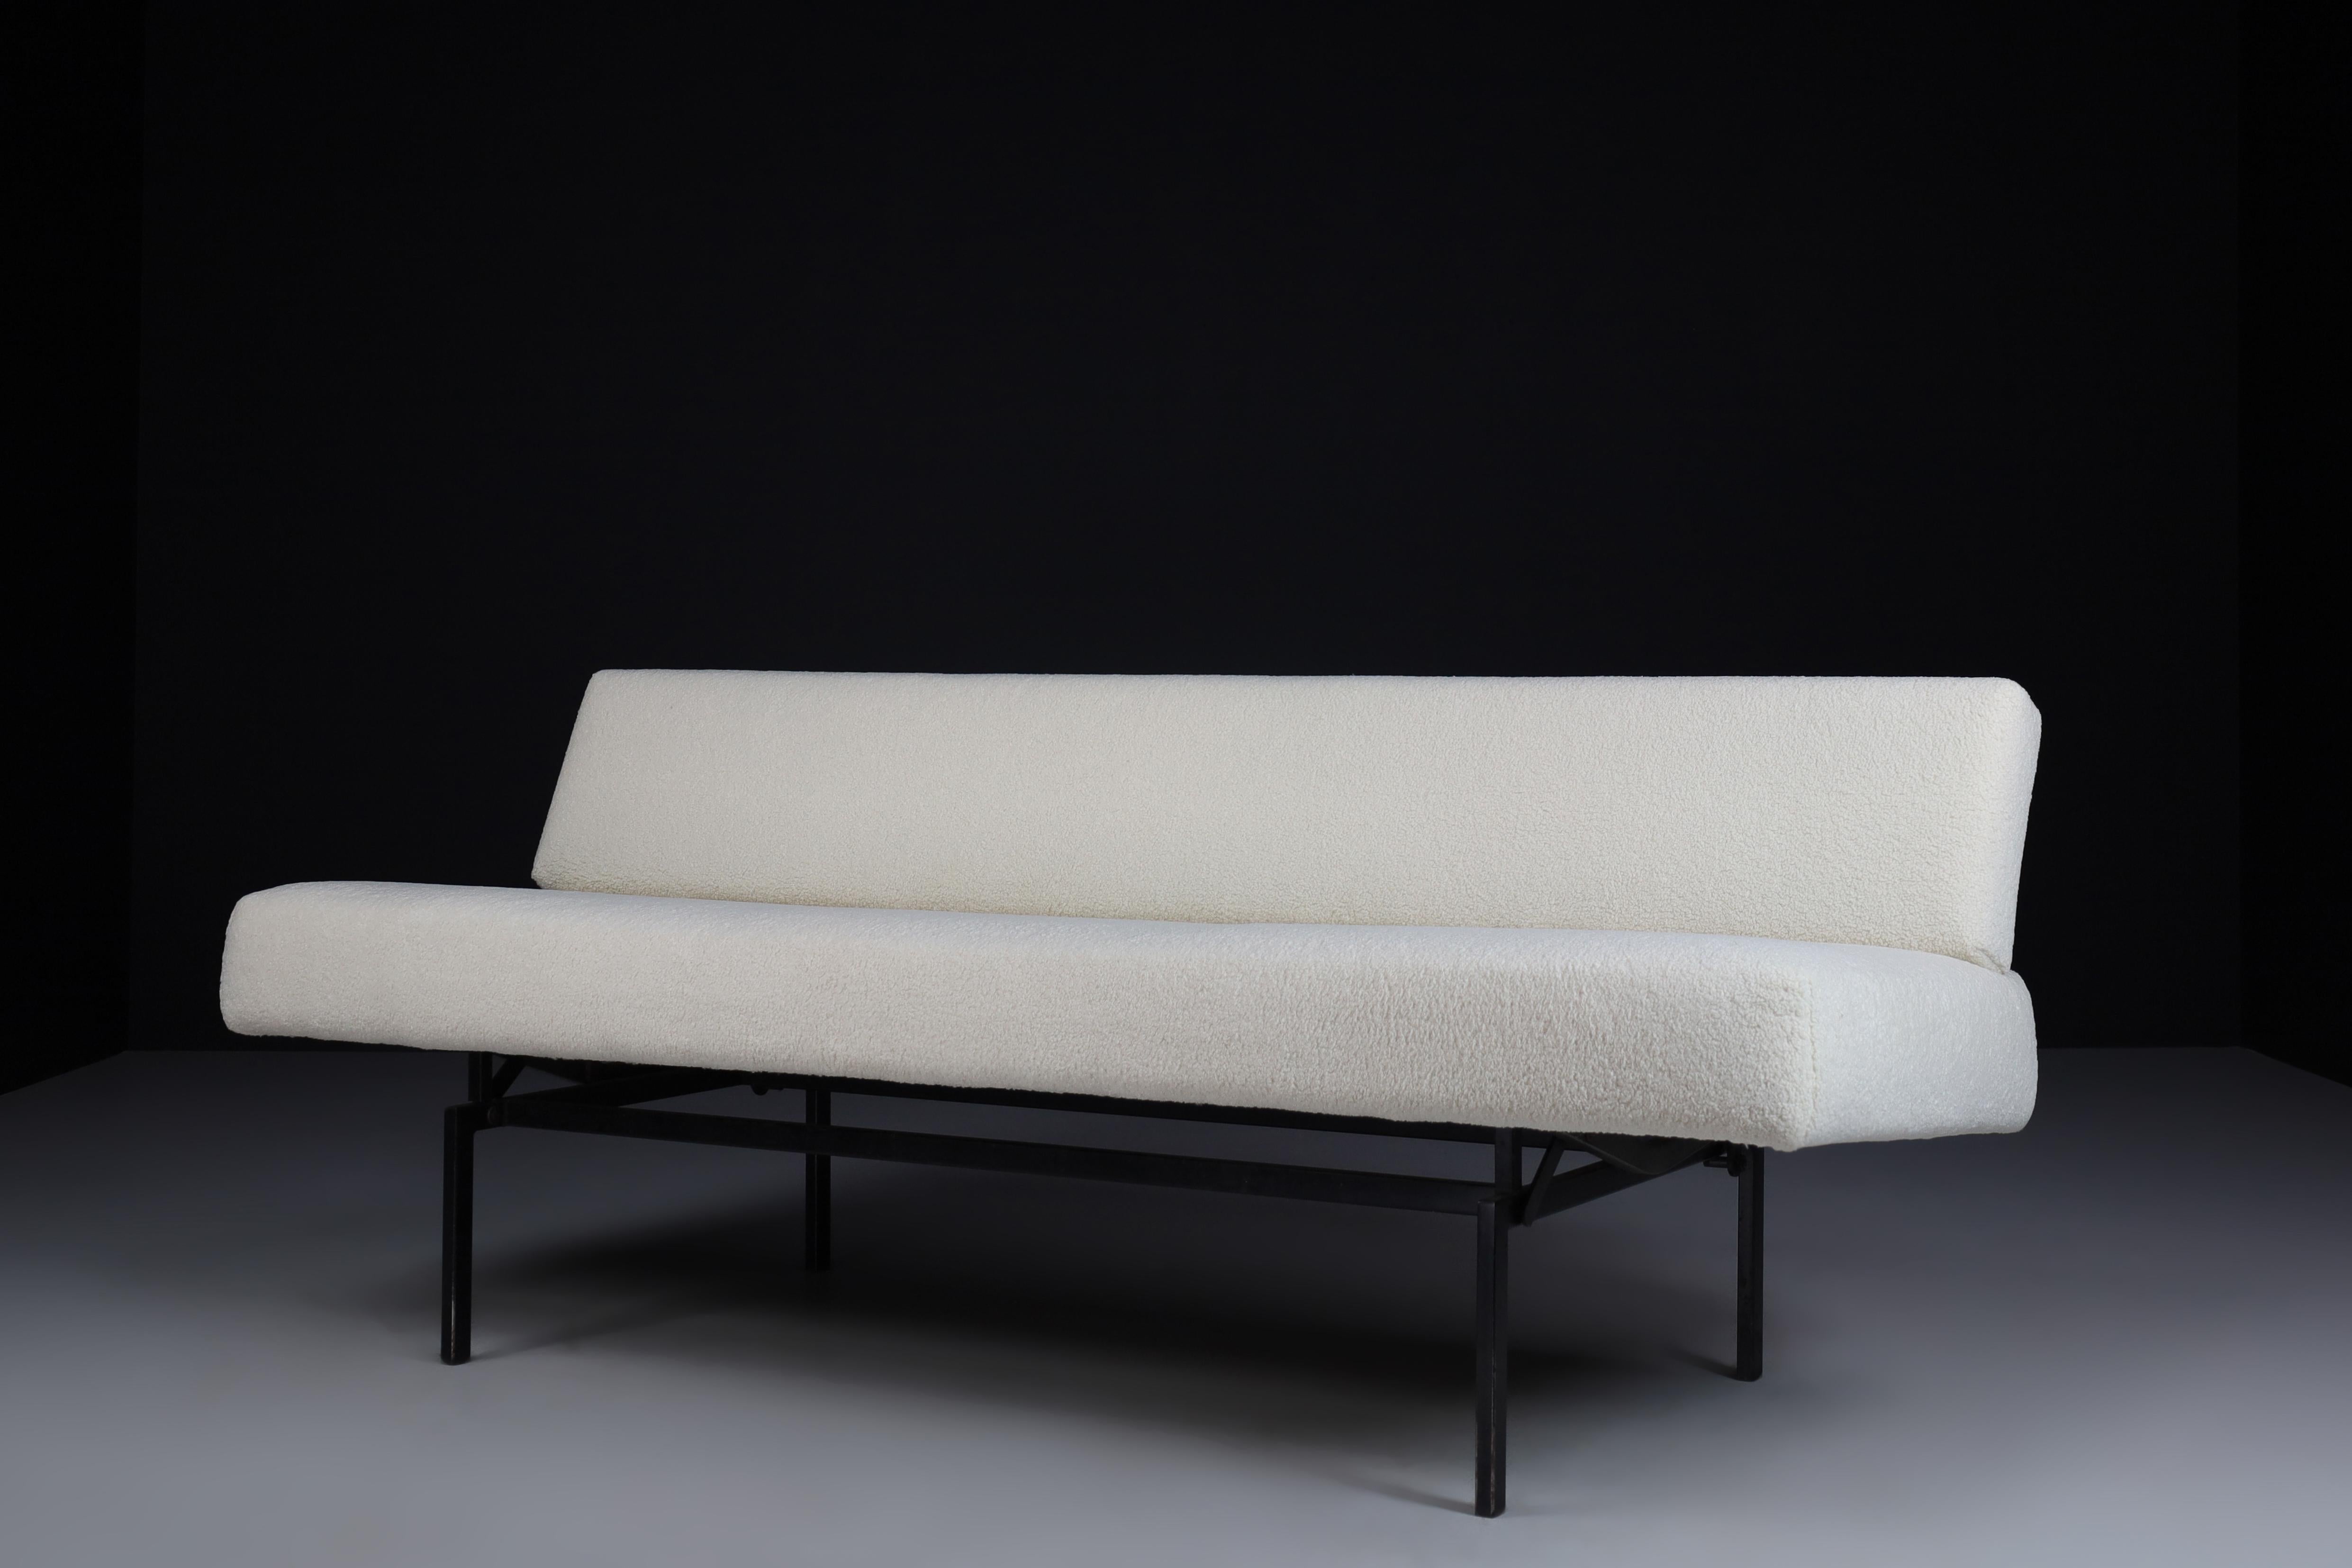 Minimalist sofa designed by Martin Visser for 't Spectrum and freshly re-upholstered with new teddy fabric. Structure in metal.
2 positions, can be converting in bed. This minimalist sofa would make an eye-catching addition to any interior such as